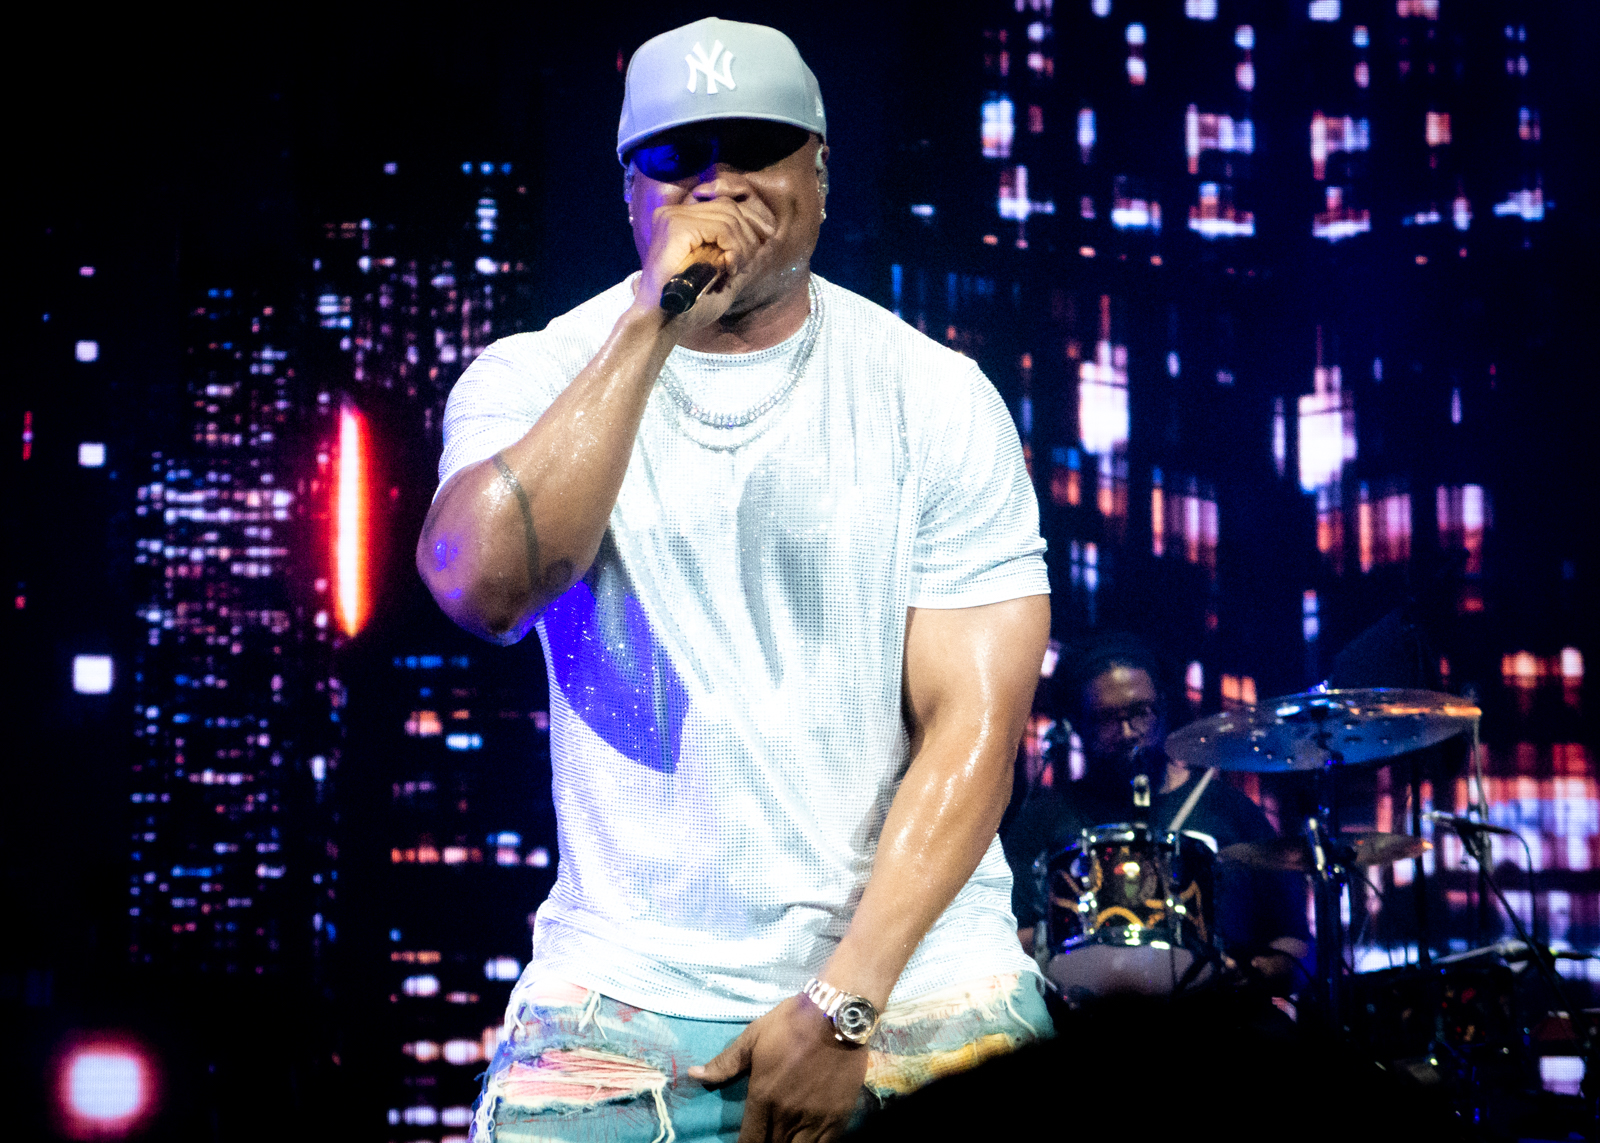 LL Cool J brings F.O.R.C.E. tour to Cleveland in celebration of 